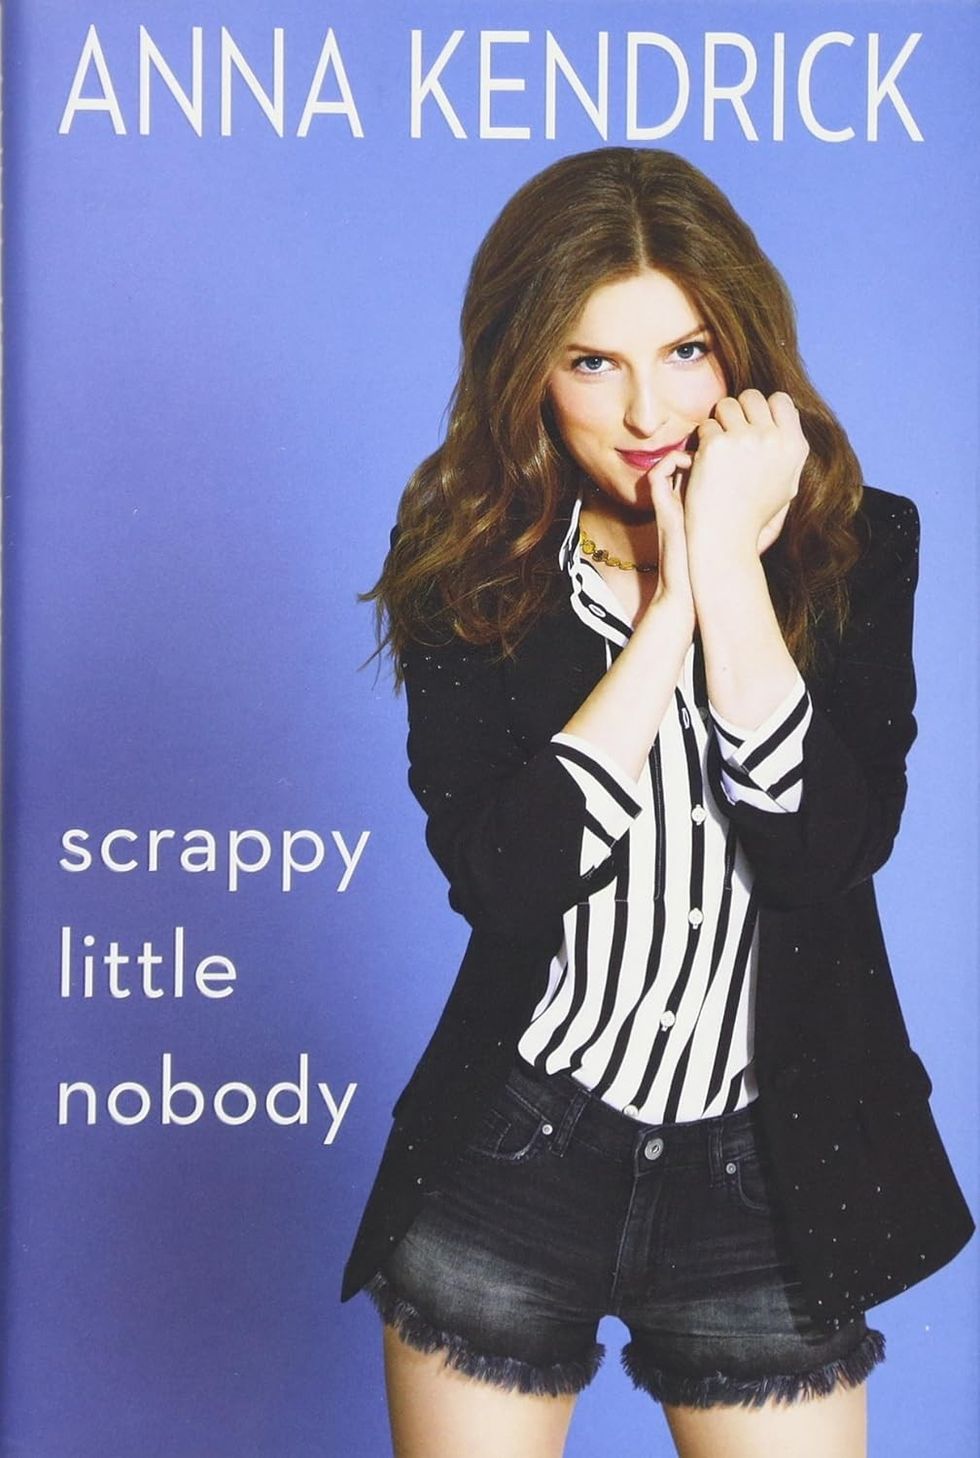 "Scrappy Little Nobody" by Anna Kendrick